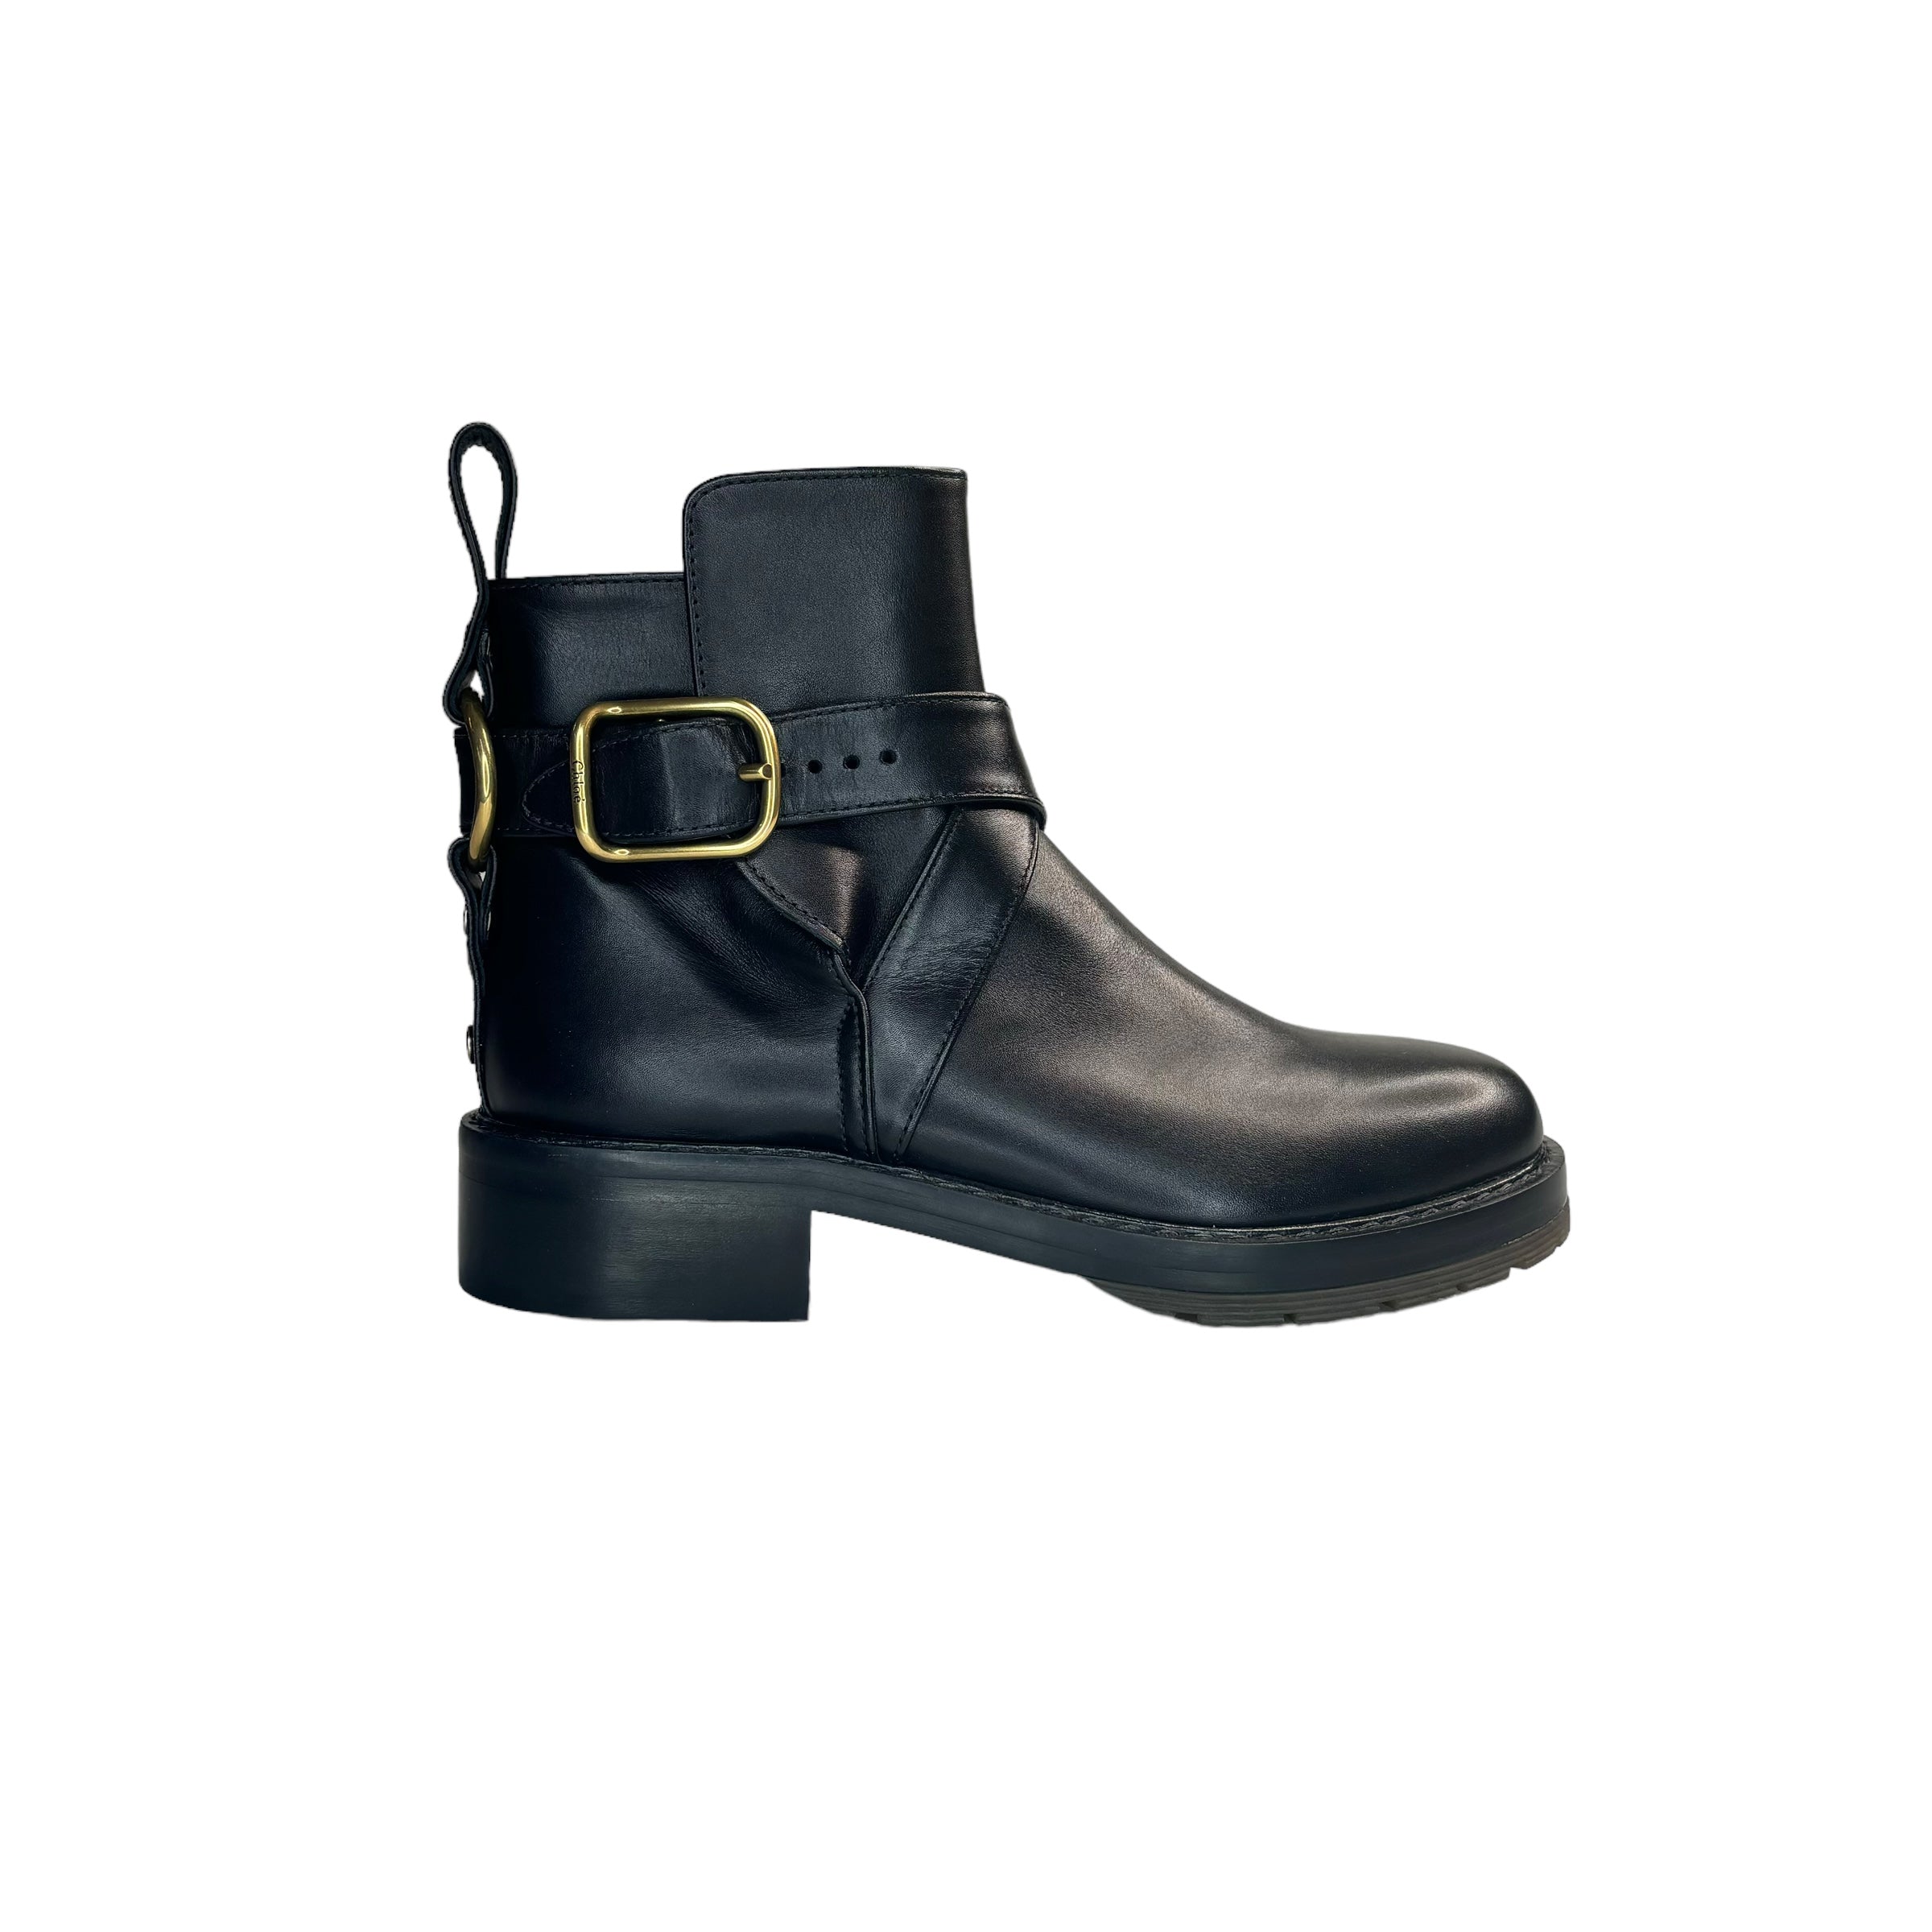 CHLOE Leather Ankle Boots / Black